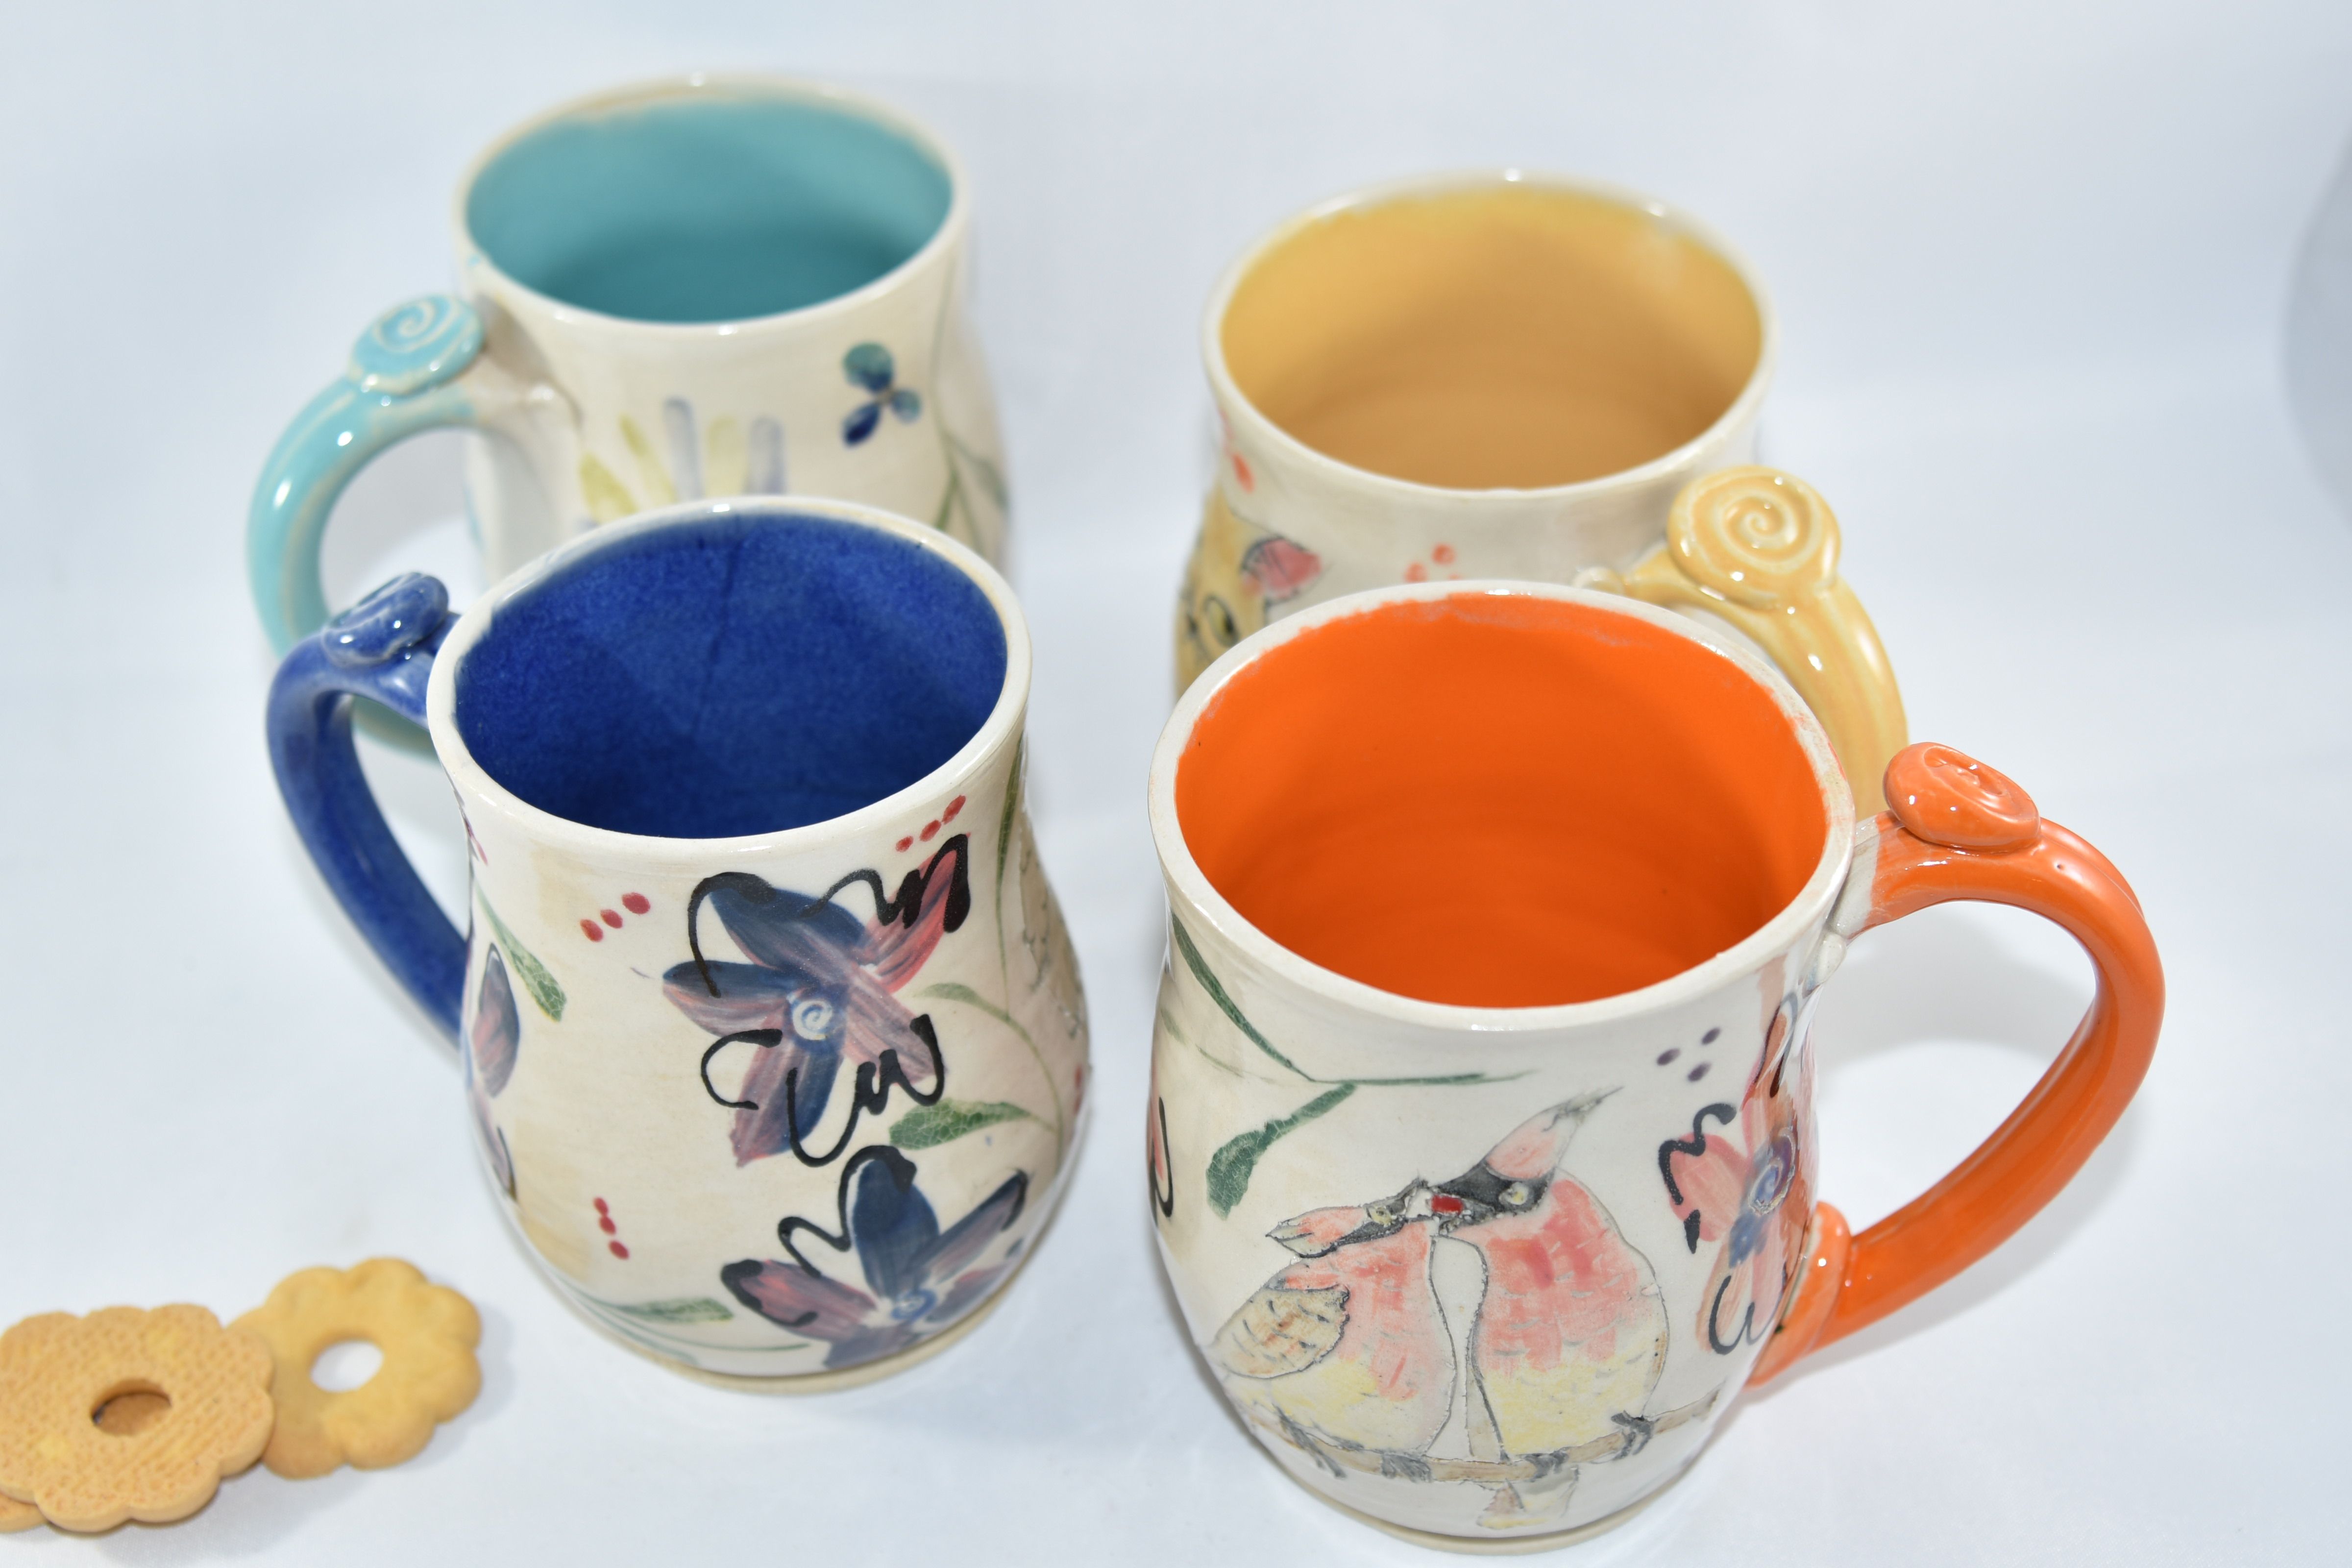 Ceramic Coffee Mug Set - Large Stoneware Cups - Hand-Painted, Two-Tone Glazed Mugs for Coffee, Tea, and More - Microwave & Dishwasher Safe - Set of 4